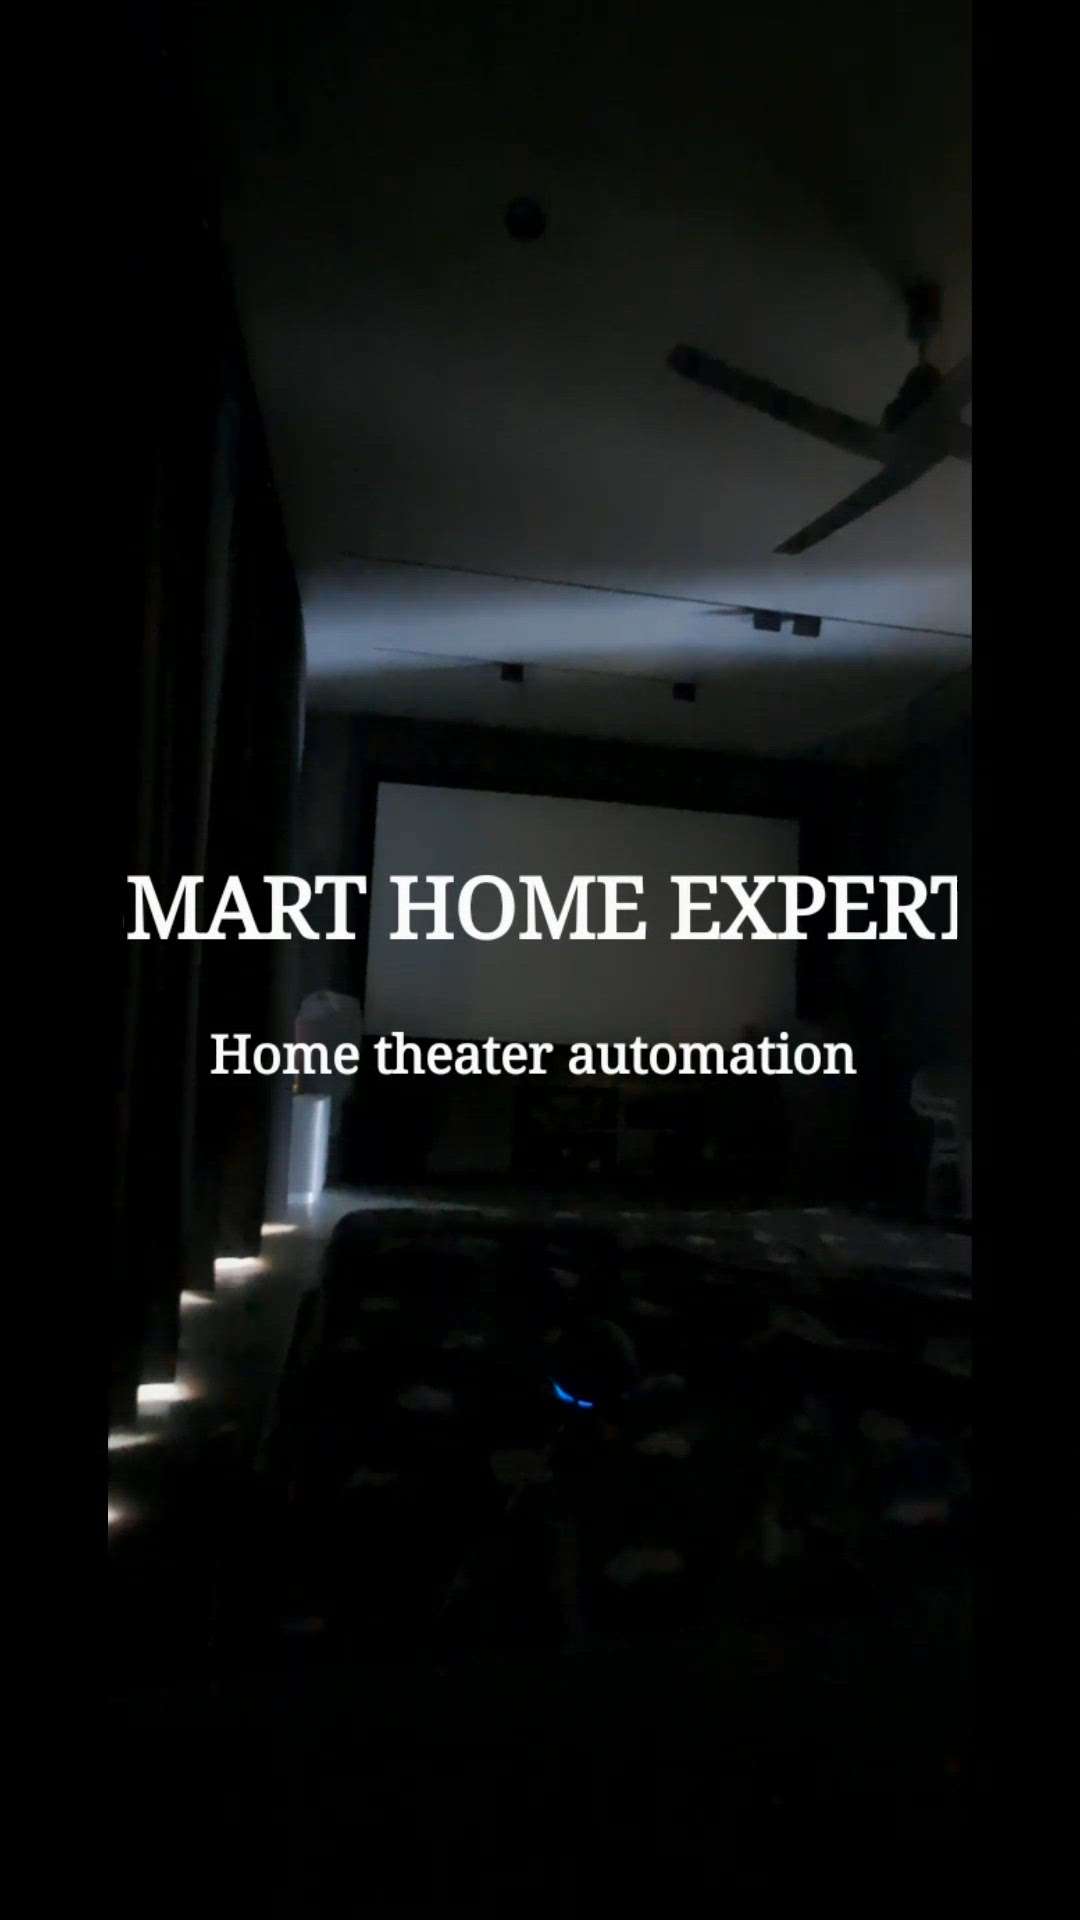 smart home theater 
complete Smart home theater system control with mobile app,nfc feature,voice command,and all remotes.